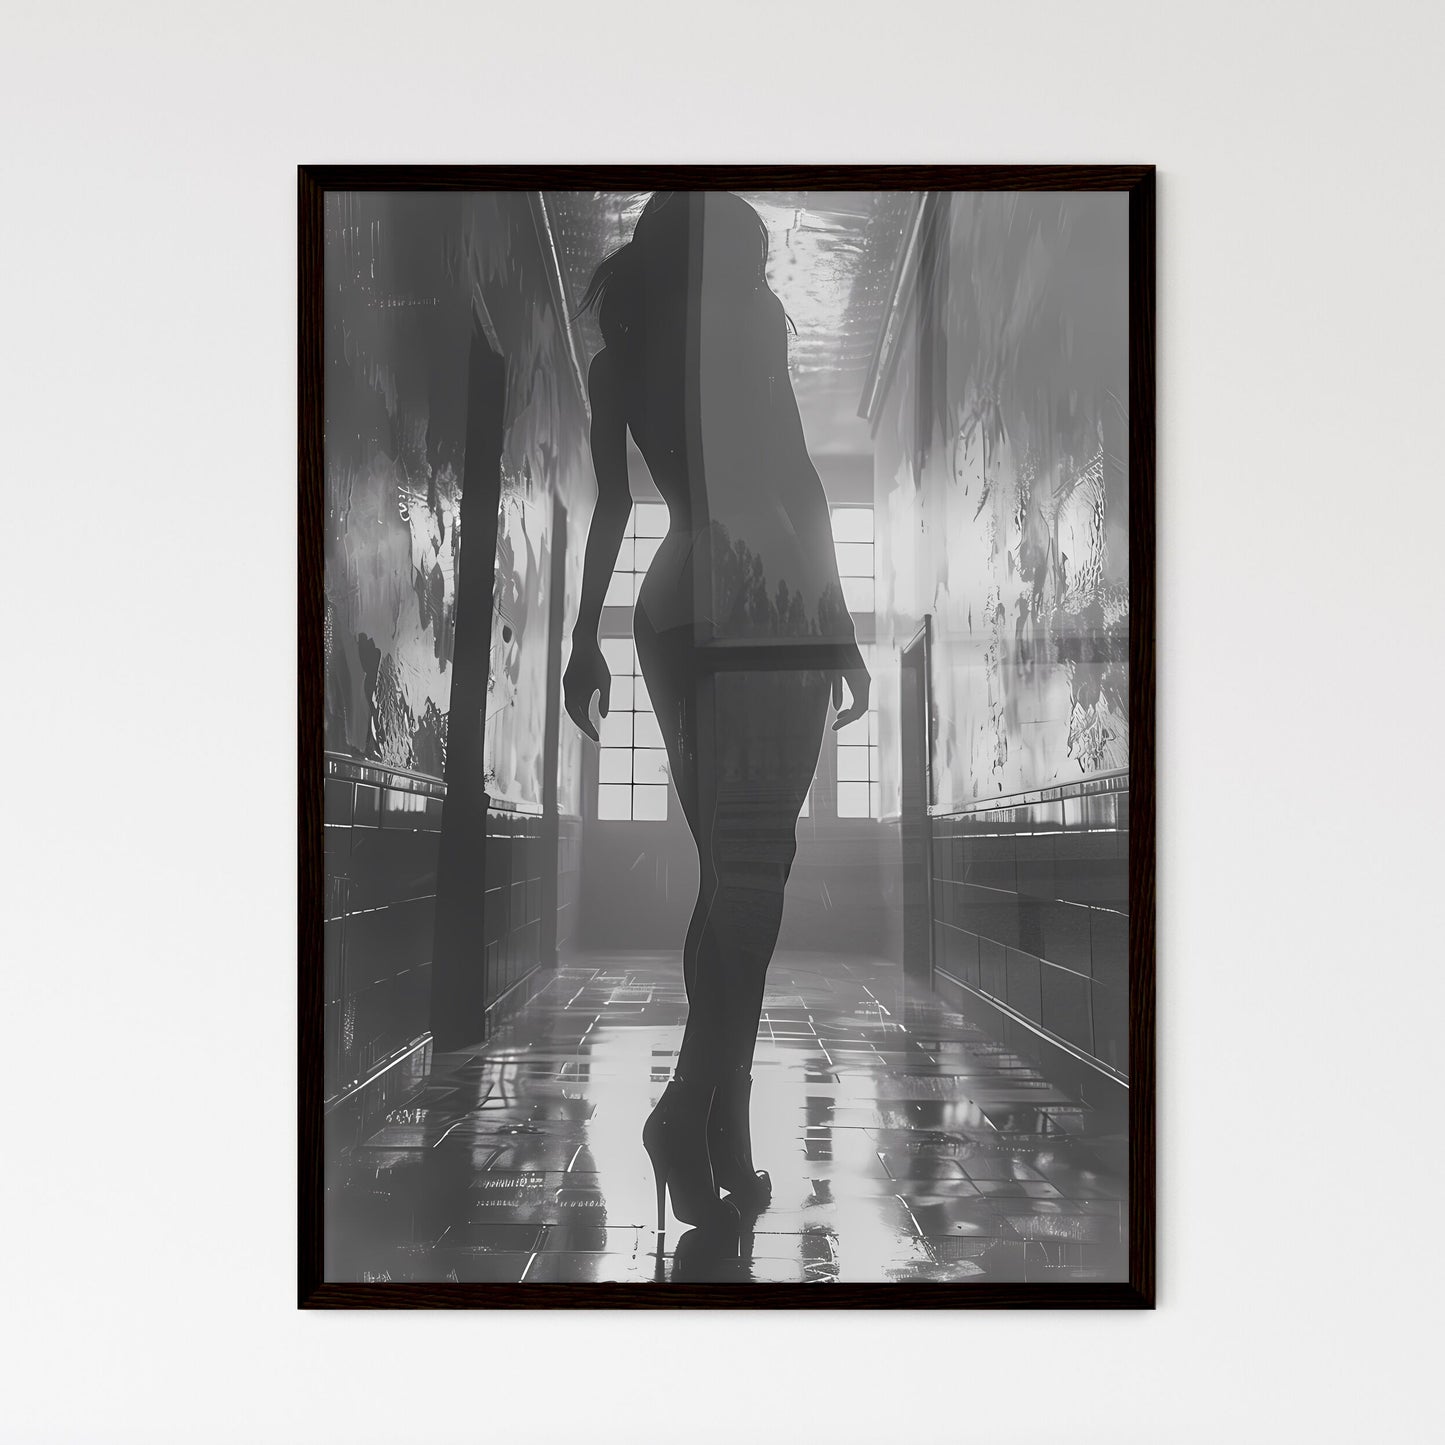 Film Noir Femme Fatale: Mysterious Black and White Painting of Shadowy Woman in Heels in Dim Lit Hallway Default Title